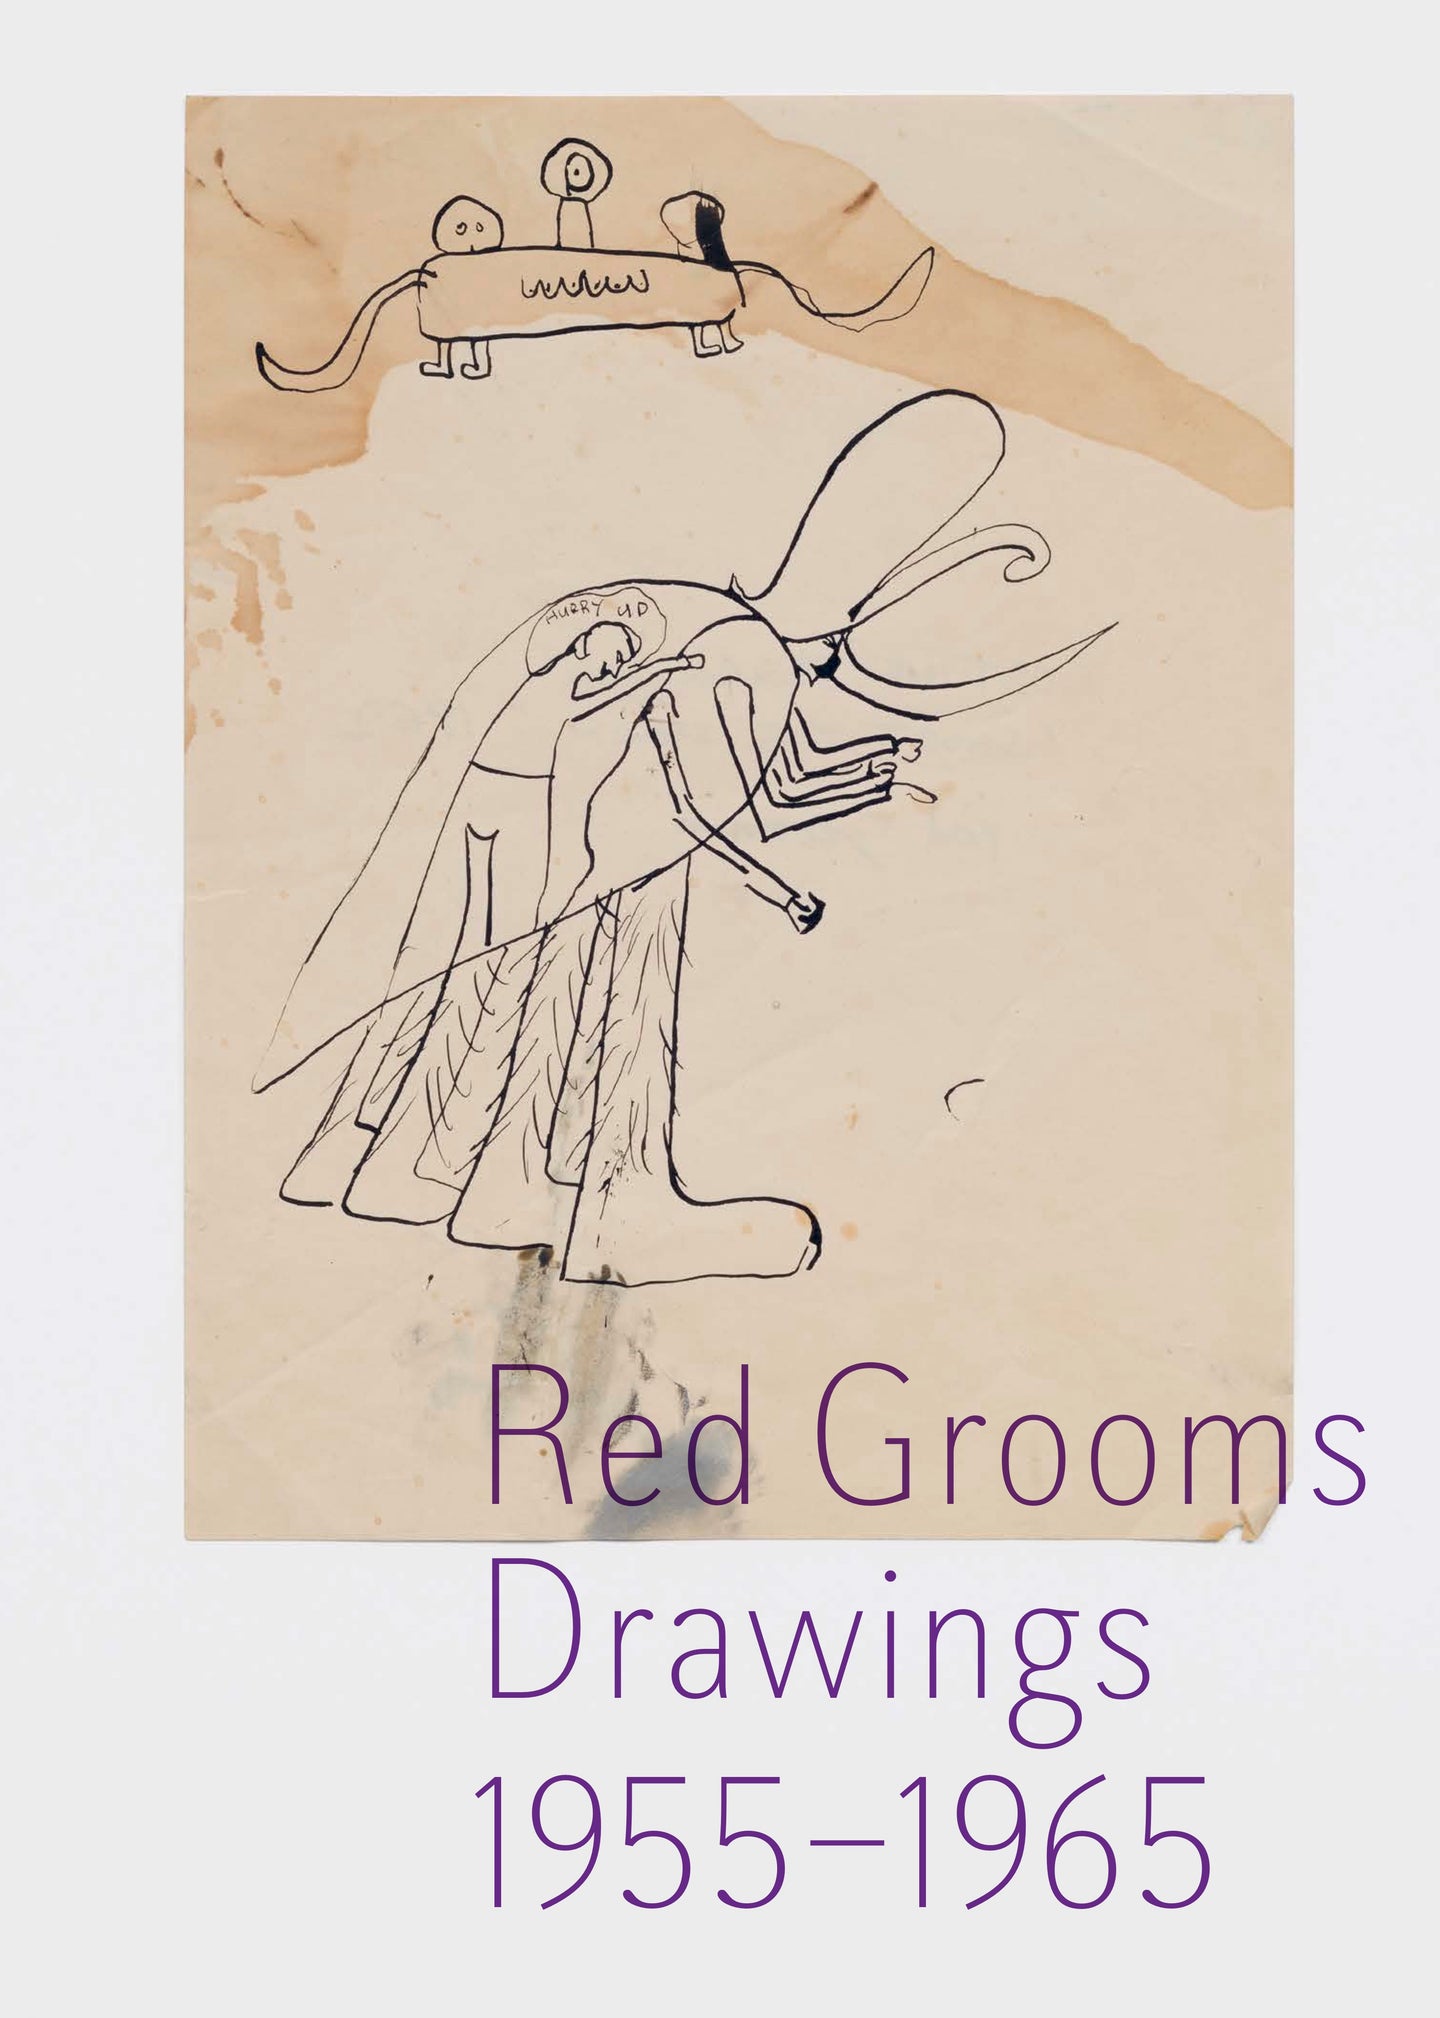 Book cover entitled Red Grooms Drawings: 1055-1965 featuring coffee-stained paper and a drawing of a few humanoid creatures with dialogue